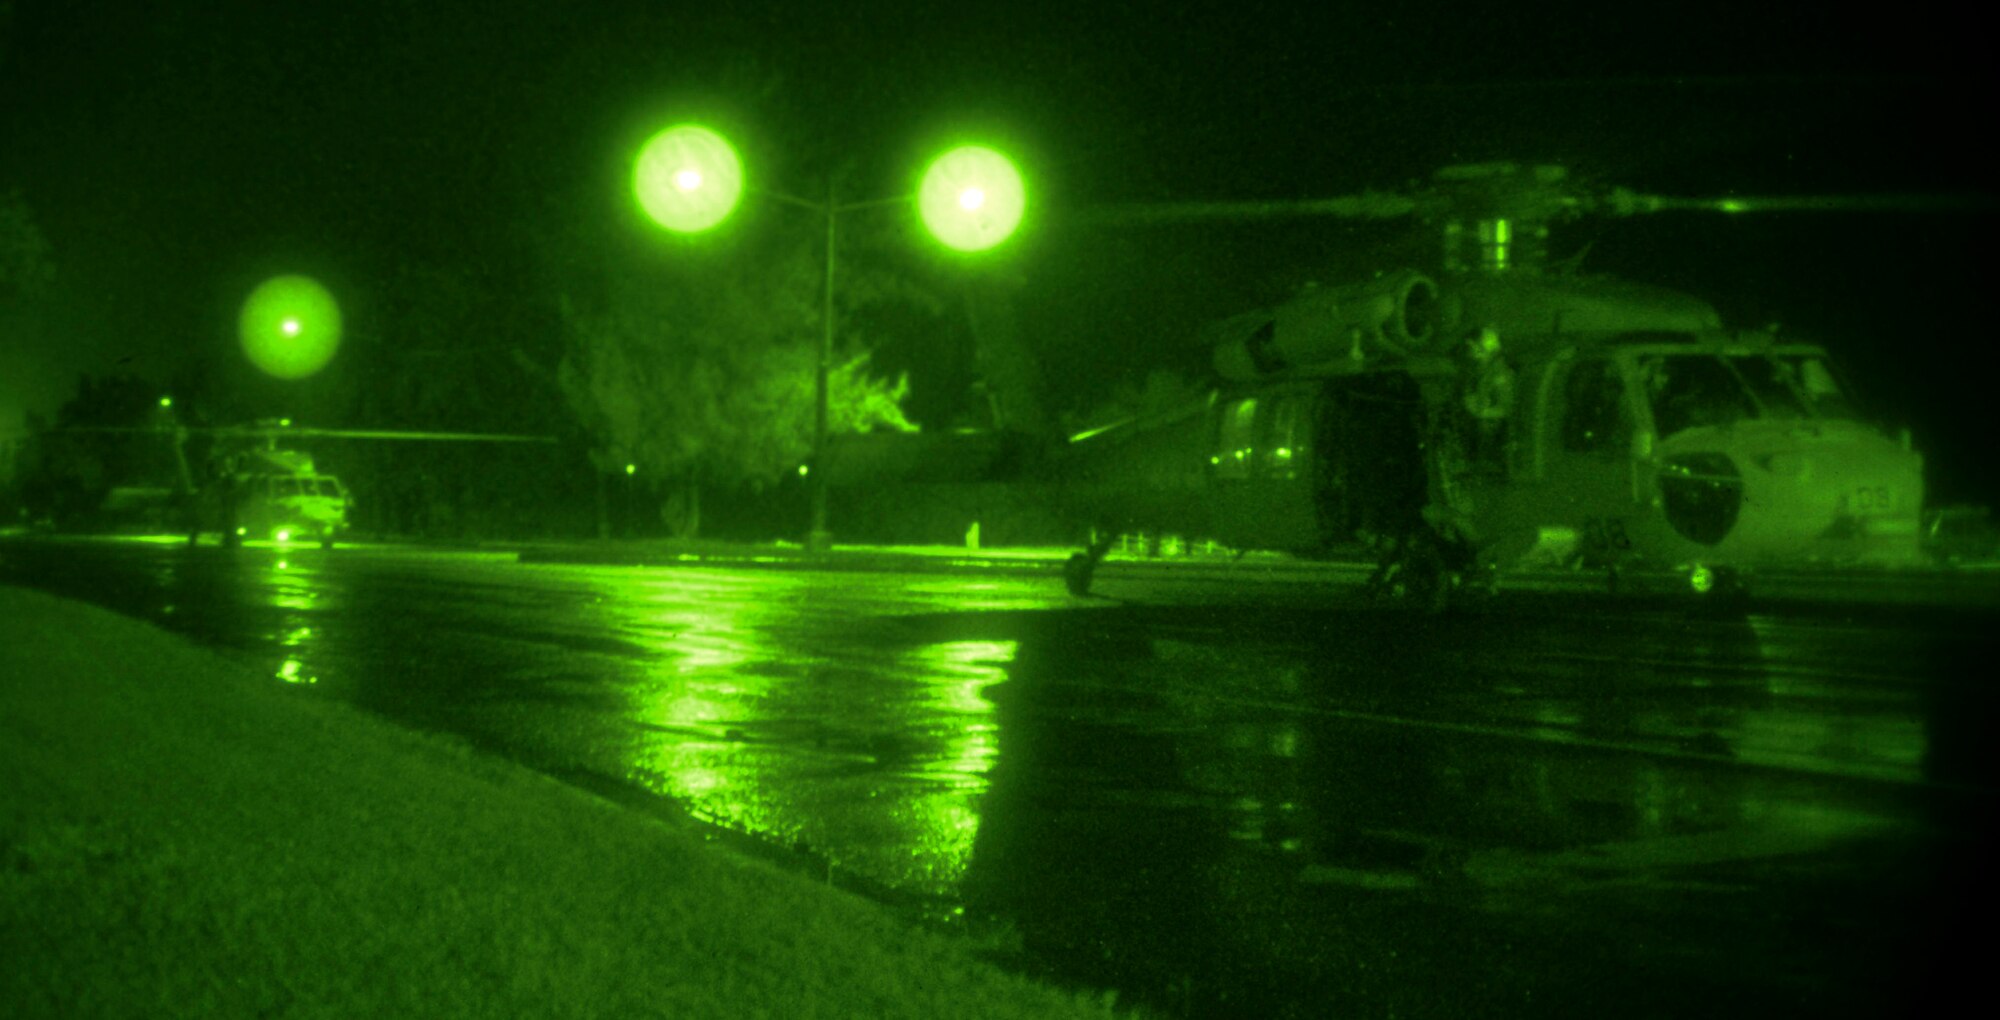 Two MH-60S Knighthawks from Navy’s Helicopter Sea Combat Squadron-25 lands on Marine Corps Drive during a Realistic Urban Training Exercise Jan. 15, 2015, in Hagatna, Guam.  The 31st Marine Expeditionary Unit practiced skills such as fast roping insertion, live sniper firing and hard hits in convoys as part of pre-deployment training. (U.S. Air Force photo by Staff Sgt. Robert Hicks/Released)